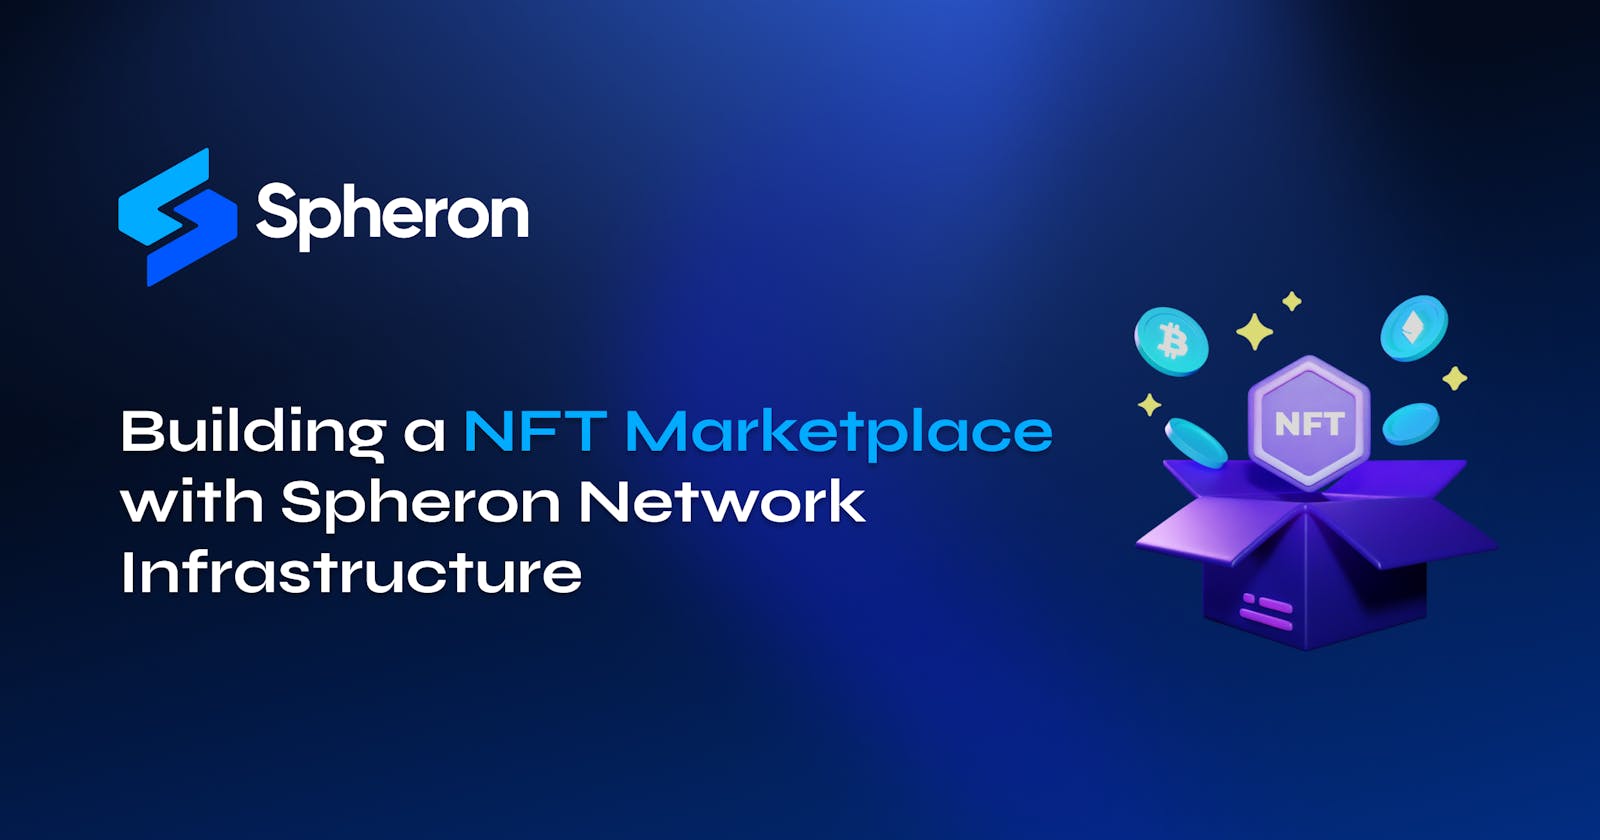 Building a NFT Marketplace with Spheron Network Infrastructure